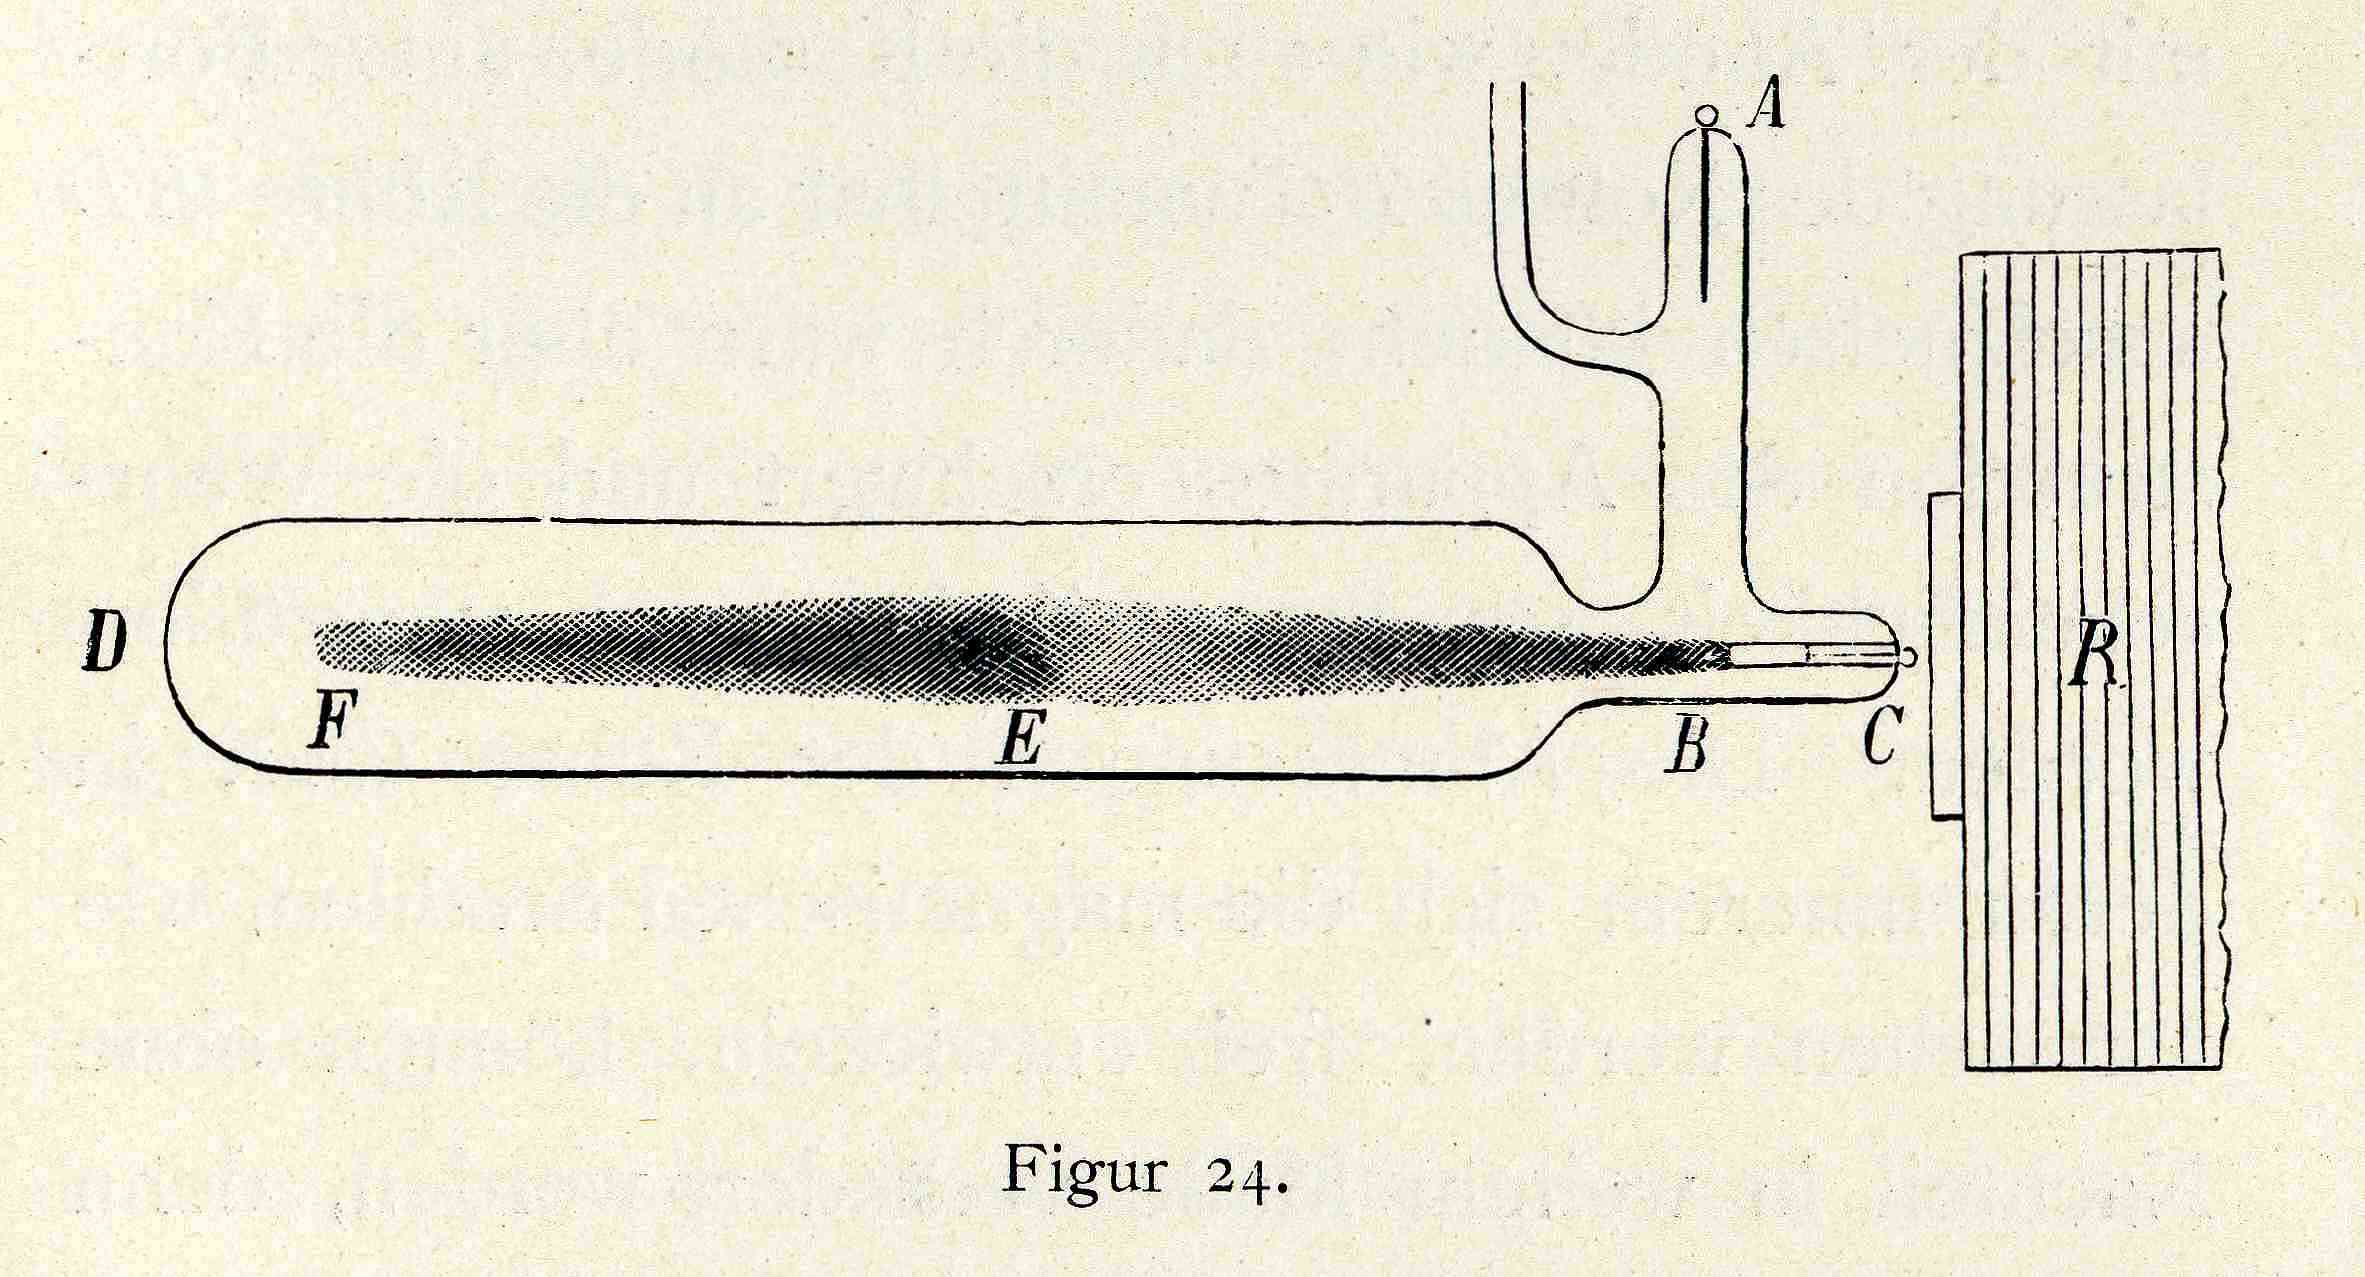 Tube de Righi
(rayons magnétiques)